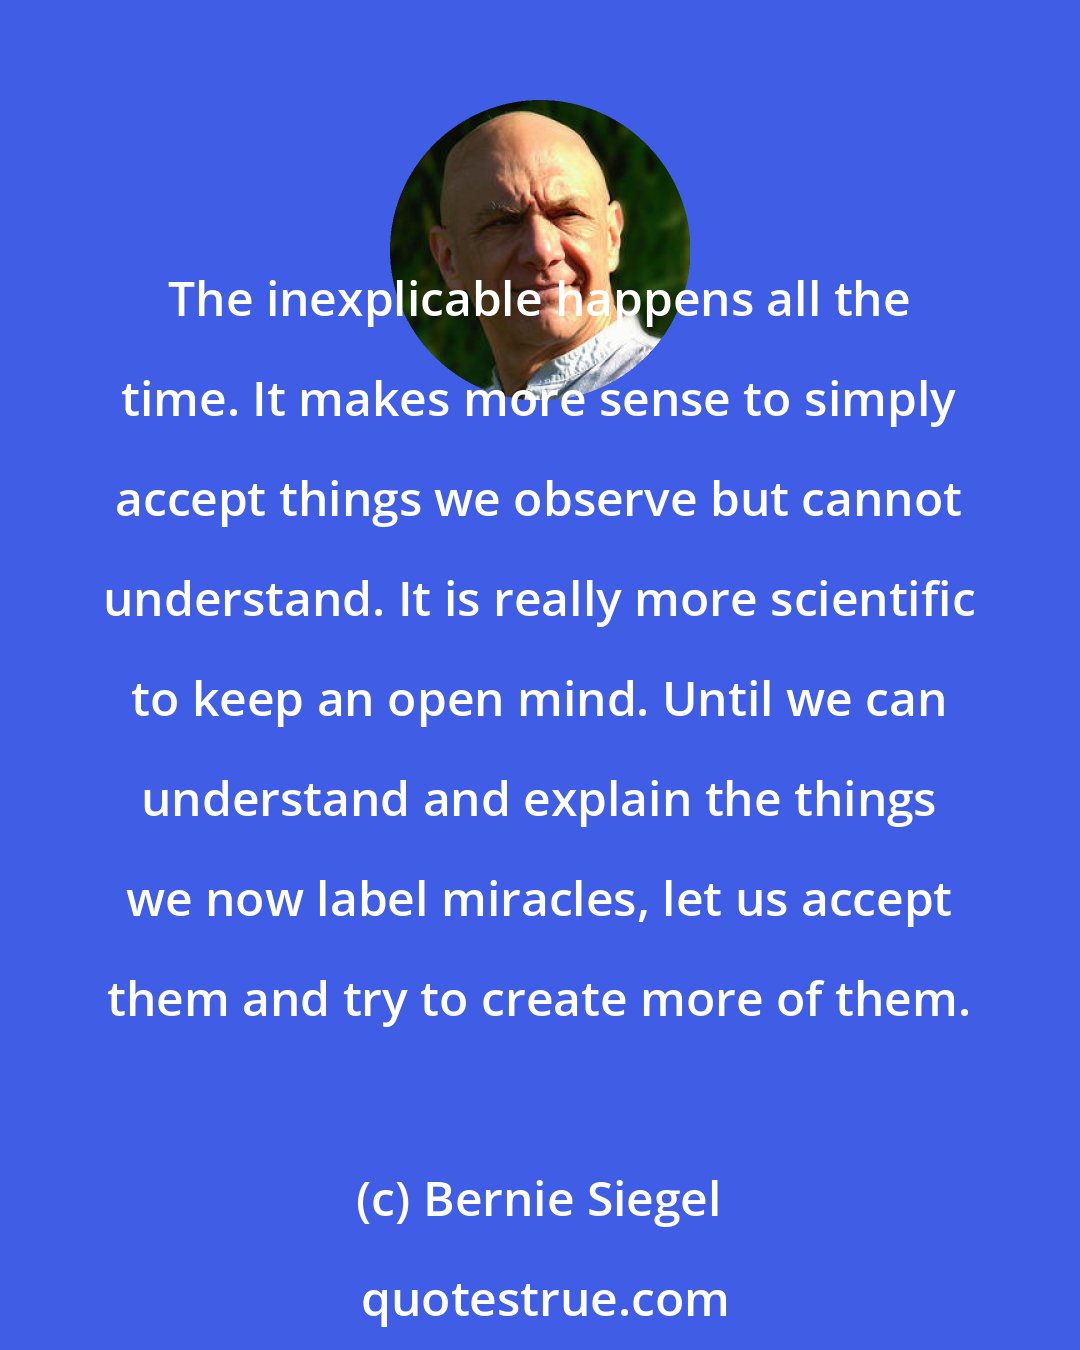 Bernie Siegel: The inexplicable happens all the time. It makes more sense to simply accept things we observe but cannot understand. It is really more scientific to keep an open mind. Until we can understand and explain the things we now label miracles, let us accept them and try to create more of them.